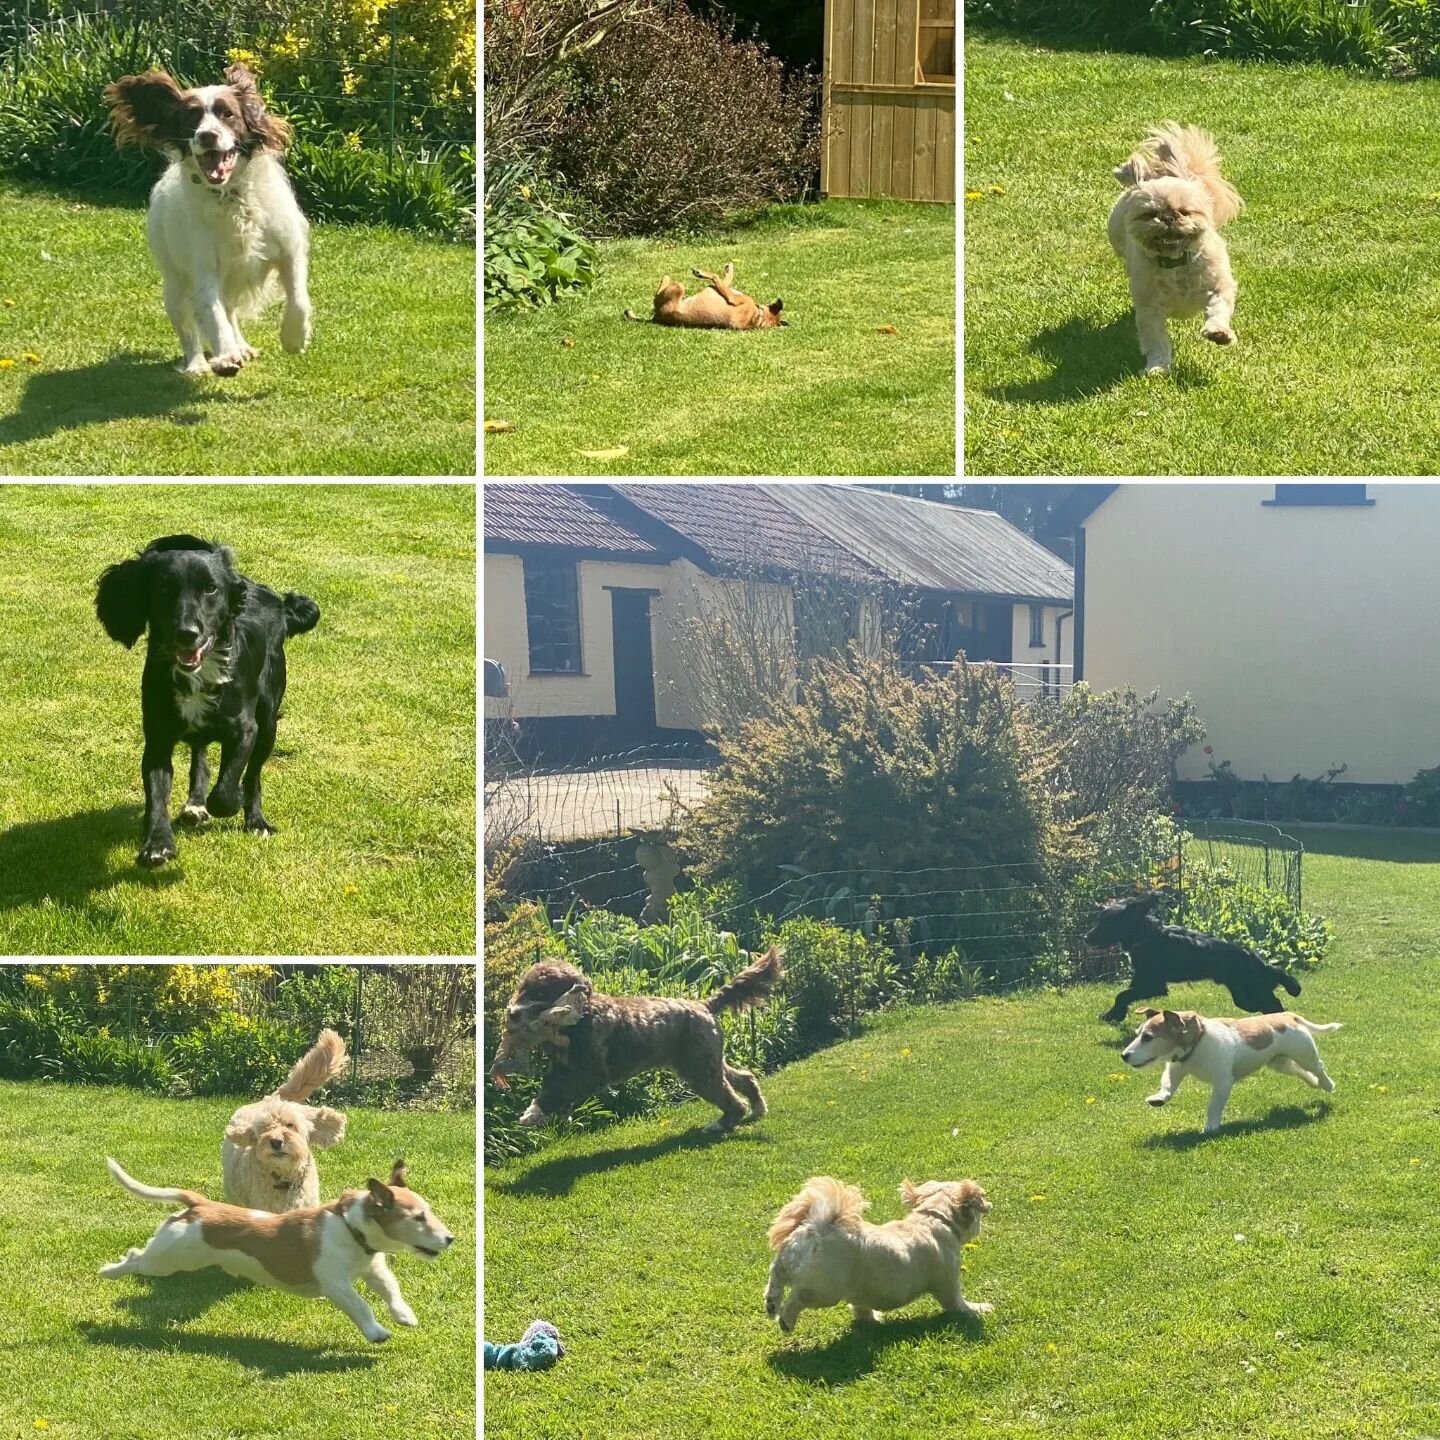 The dogs are loving the sun as much as we are! 🌞 

#doghomeboarding #dogboarding #homefromhome #homefromhomedogboarding #garden #funinthesun #springerspaniel #cockerspaniel #jackrussell #cockerpoo #shitzu #intaliangreyhoundxterrier